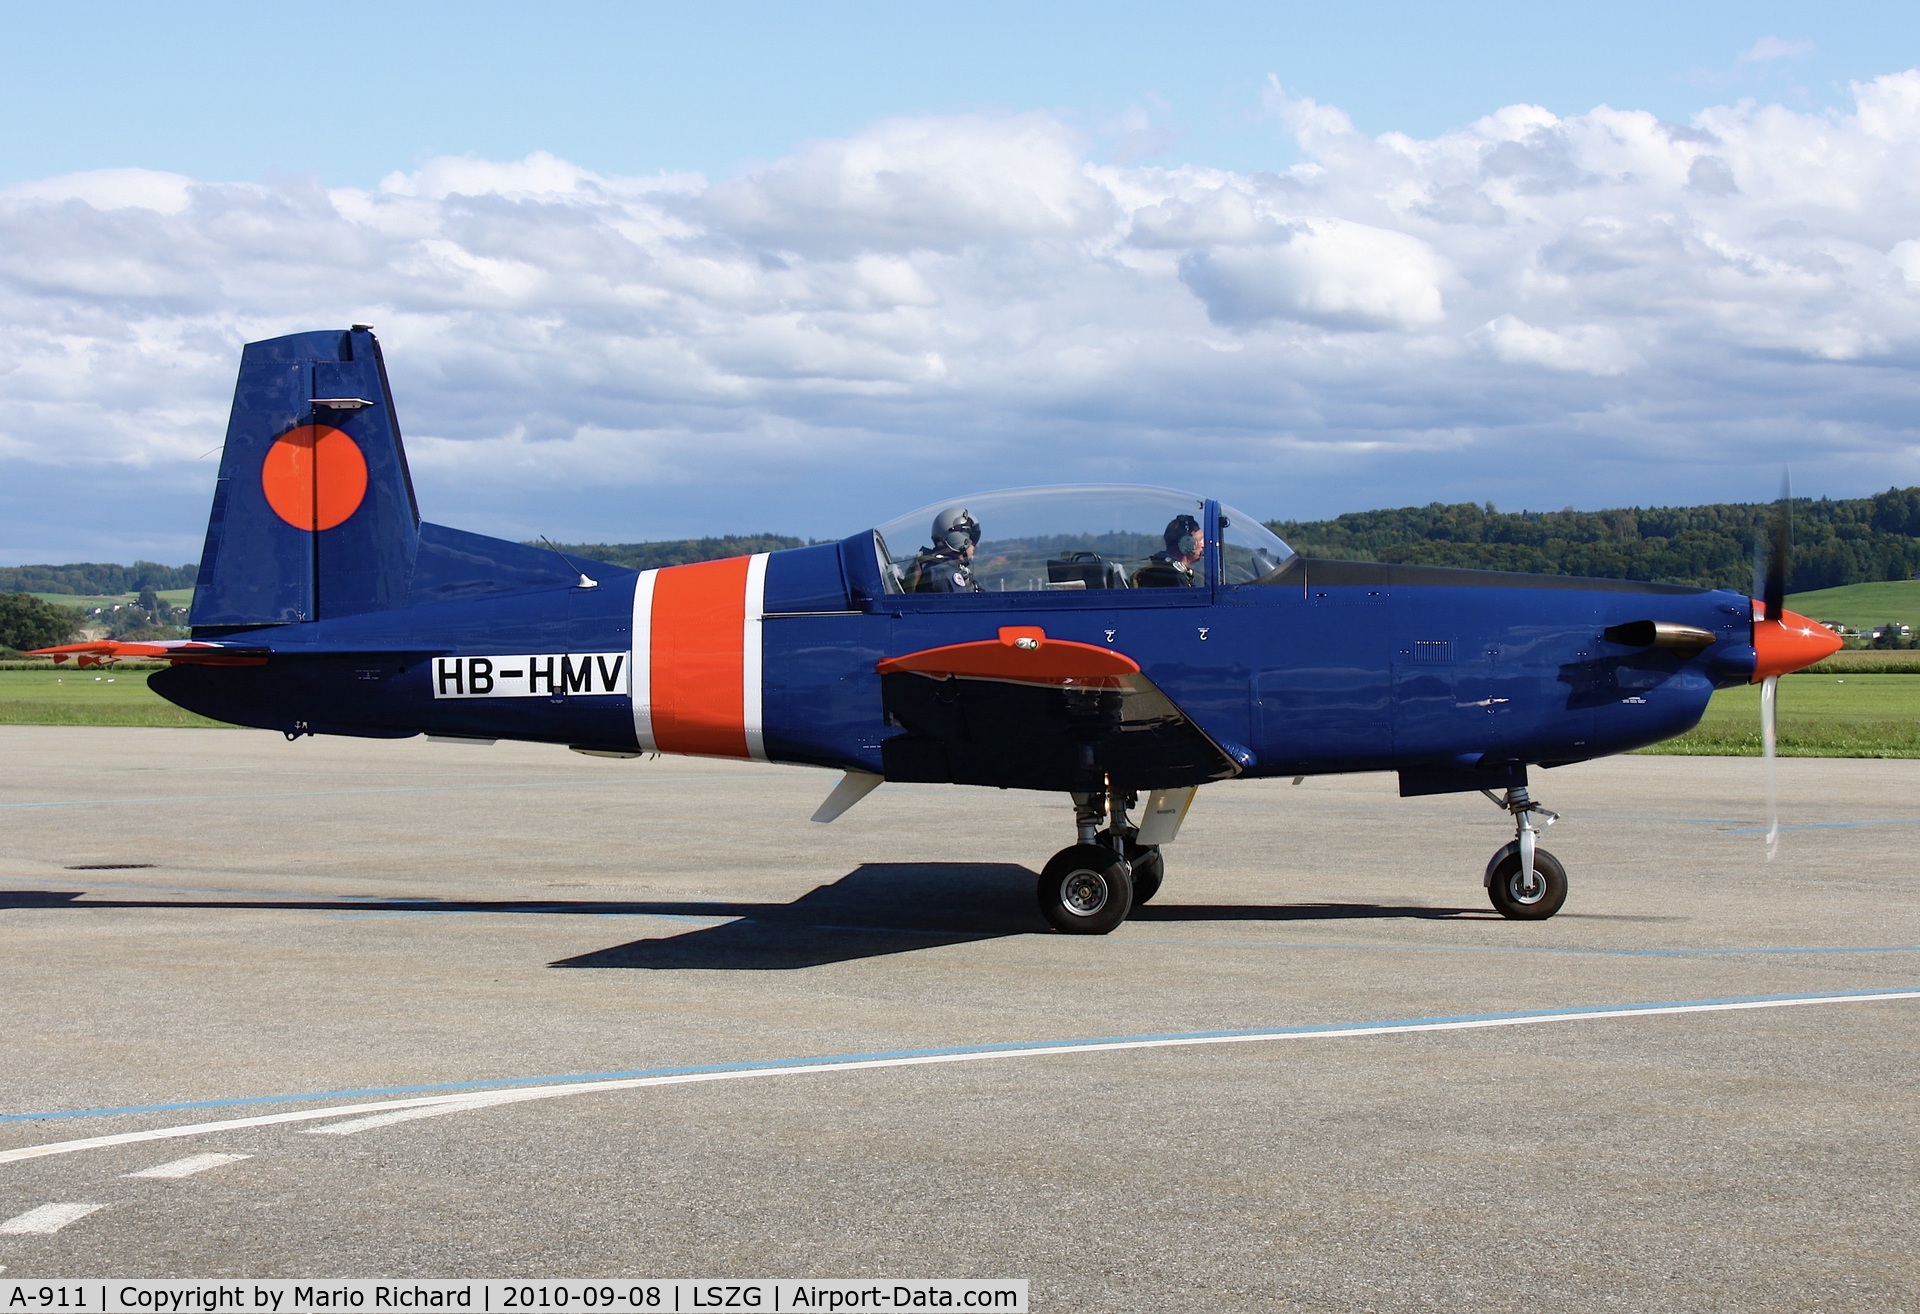 A-911, 1982 Pilatus PC-7 C/N 319, in new paint as HB-HMV later on F-HGPM